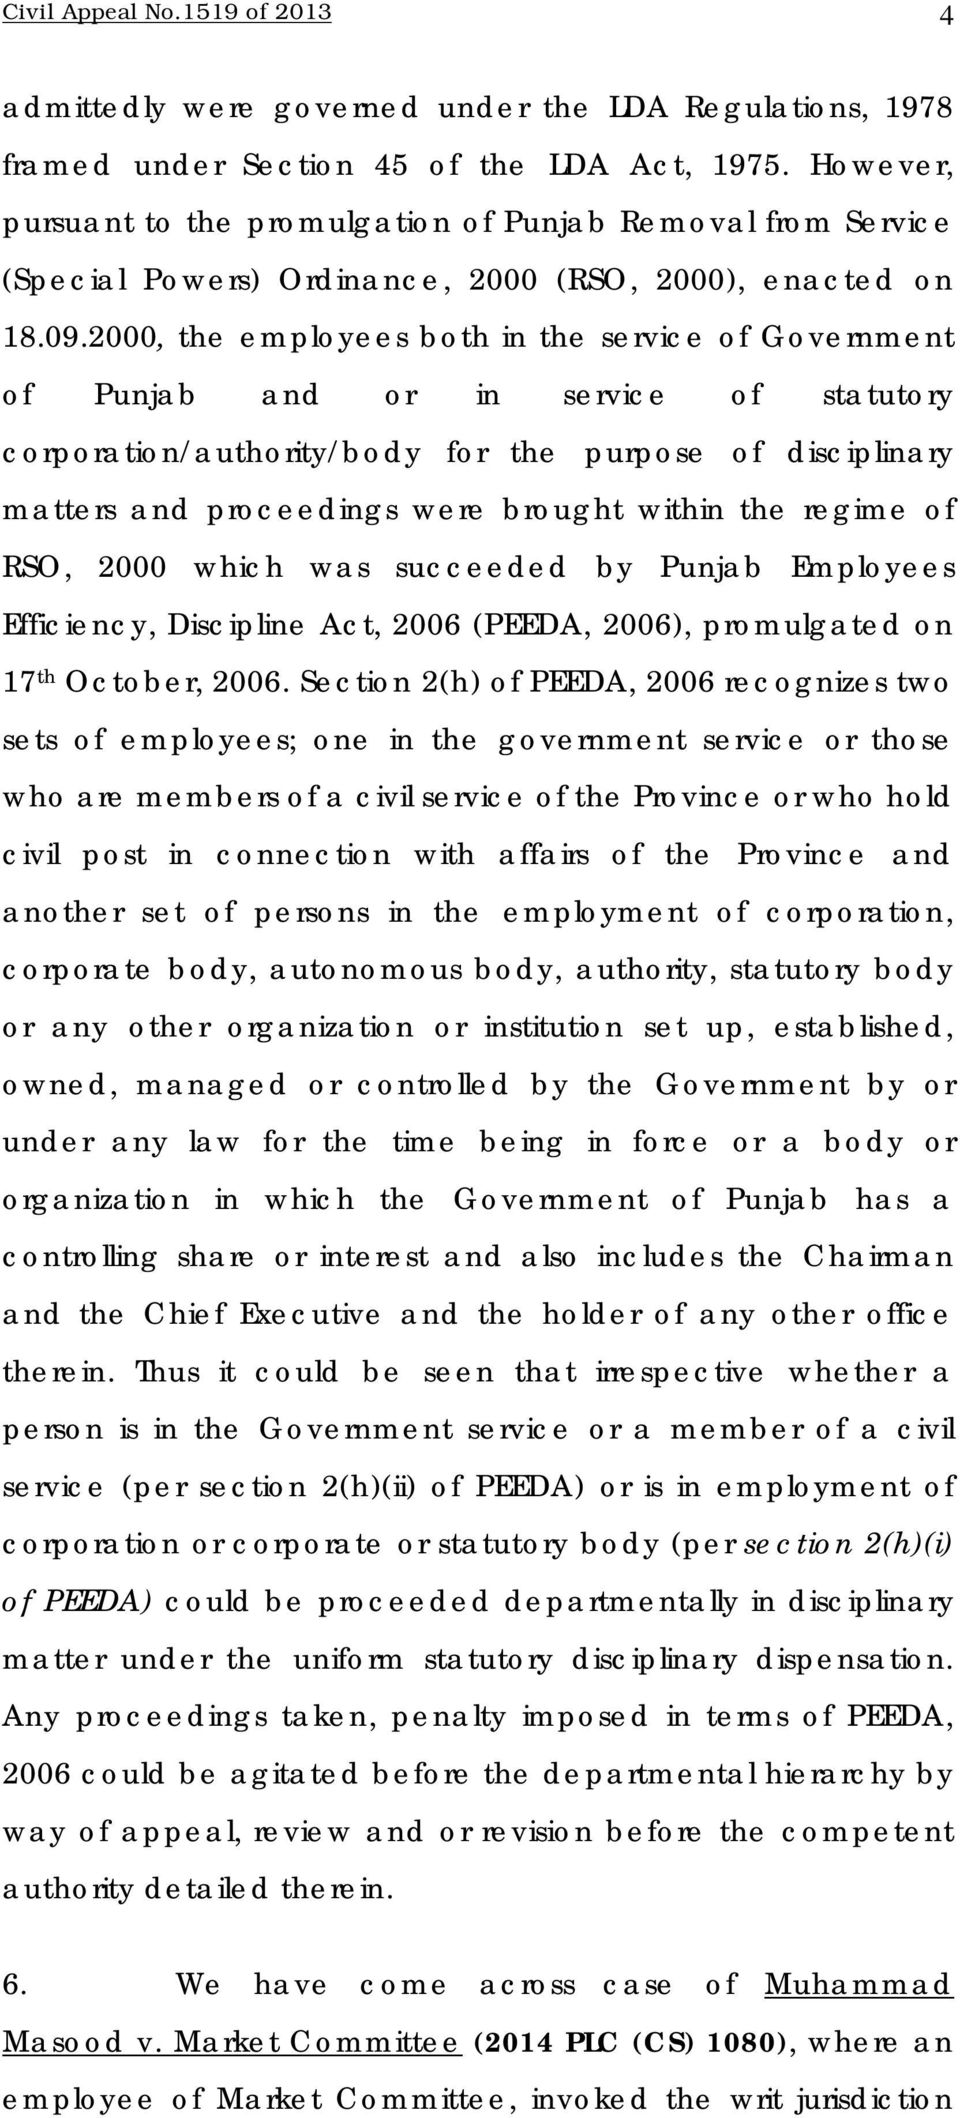 2000, the employees both in the service of Government of Punjab and or in service of statutory corporation/authority/body for the purpose of disciplinary matters and proceedings were brought within